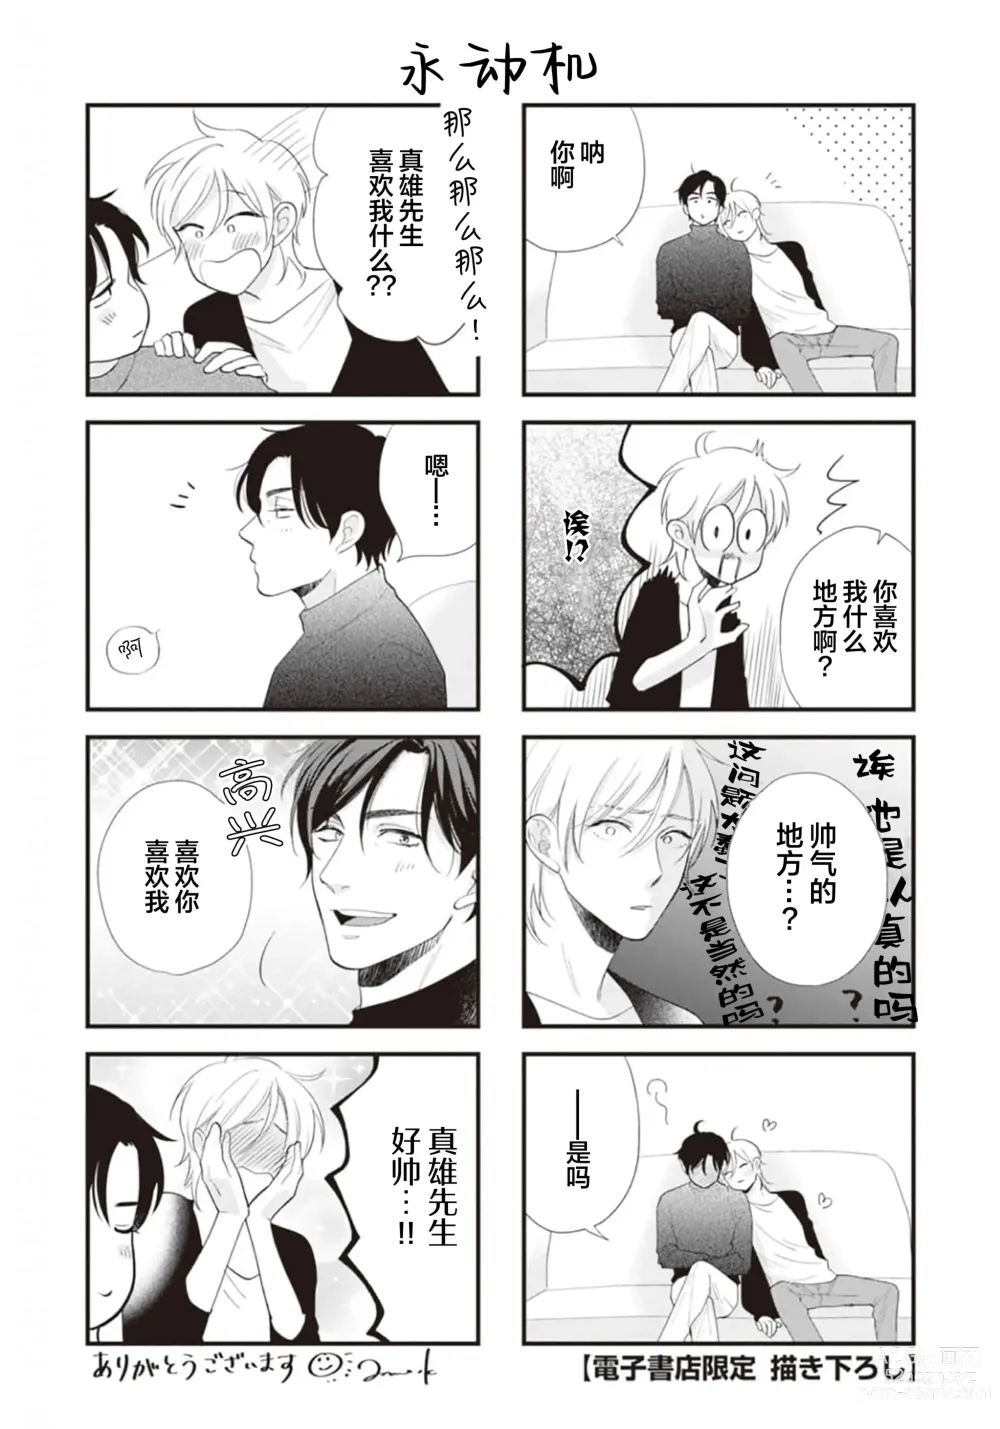 Page 198 of manga Toshiue no hitoーsecond bloomー｜年上之人—second bloom—Chinese]